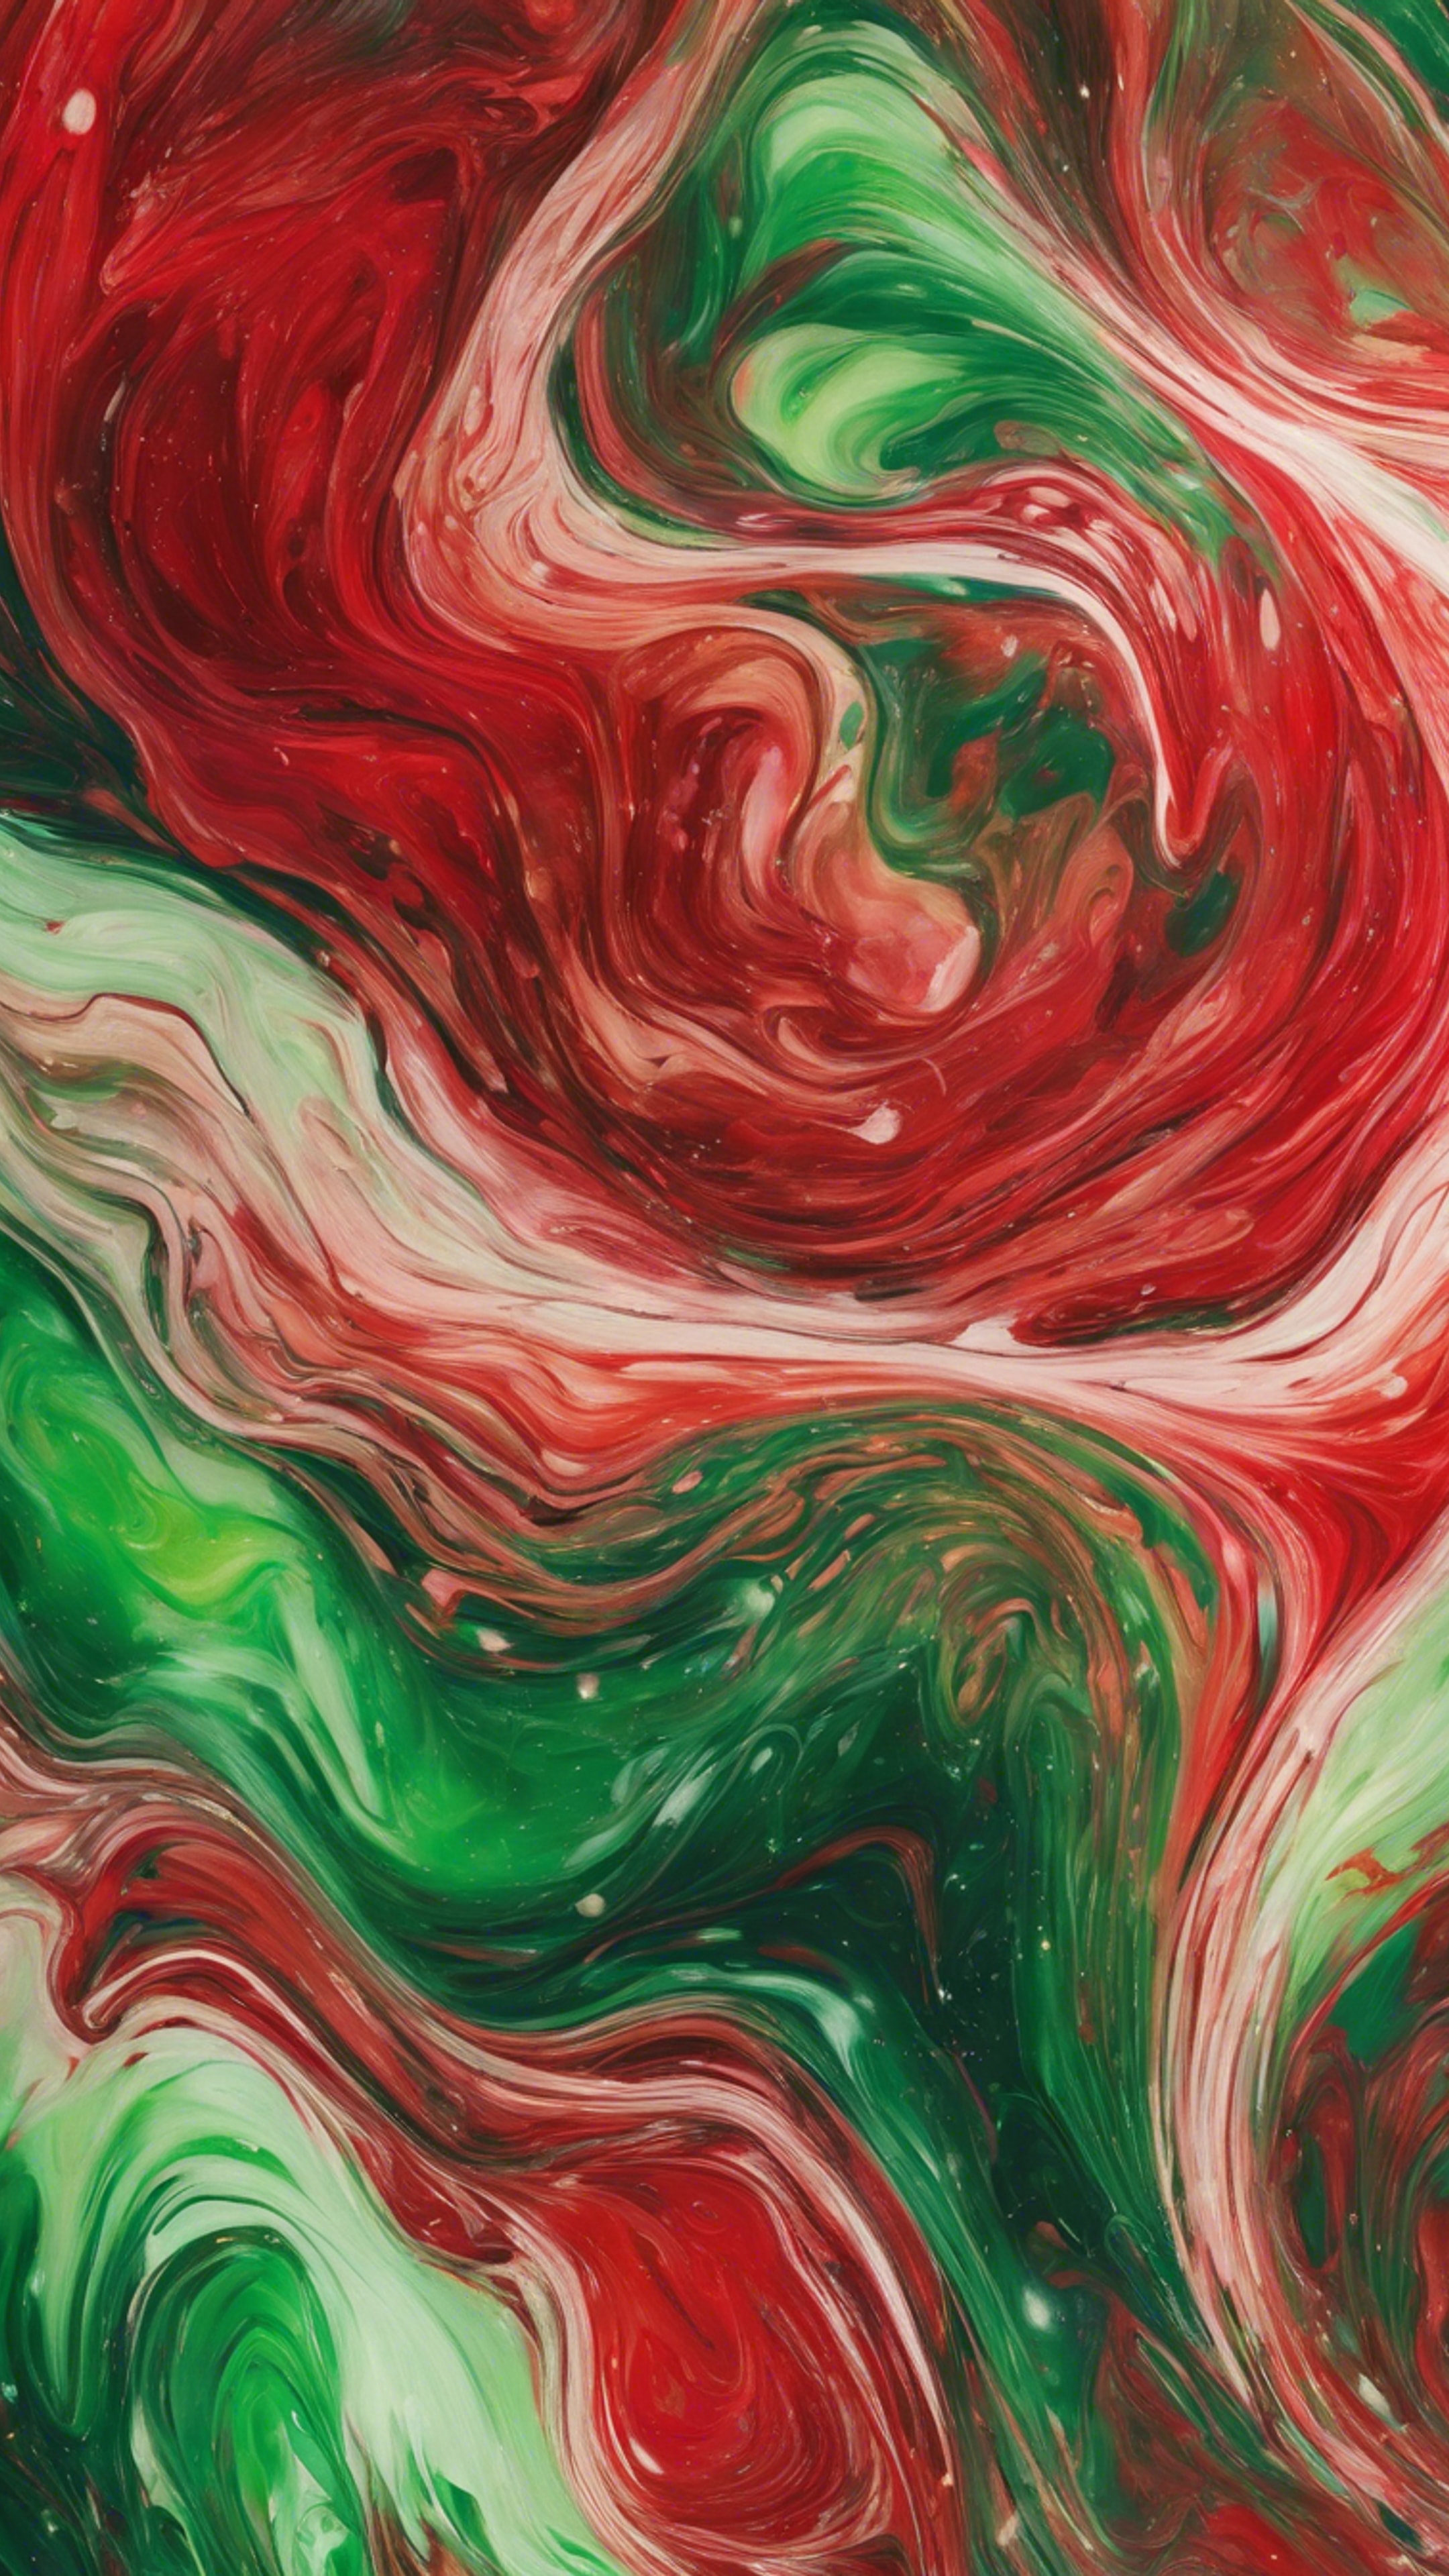 A vivid painting of swirling red and green abstract patterns Шпалери[5978fc4bccef4bcc8a58]